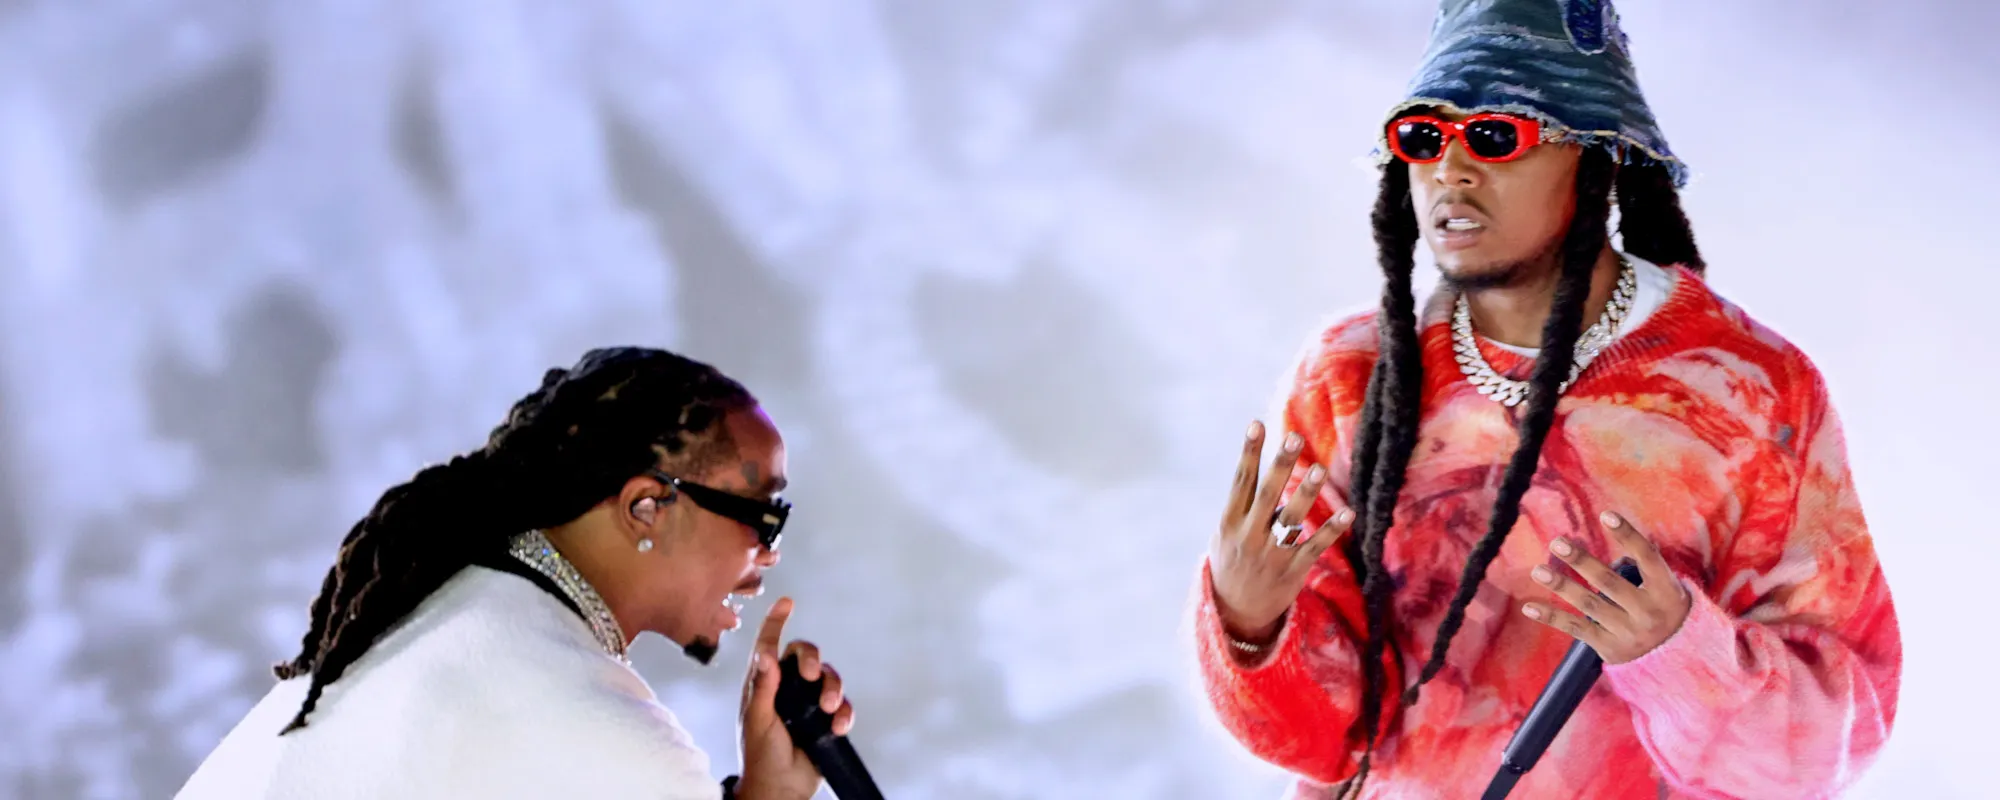 Quavo Pens Heartbreaking “Without You” in Honor of the Late Takeoff